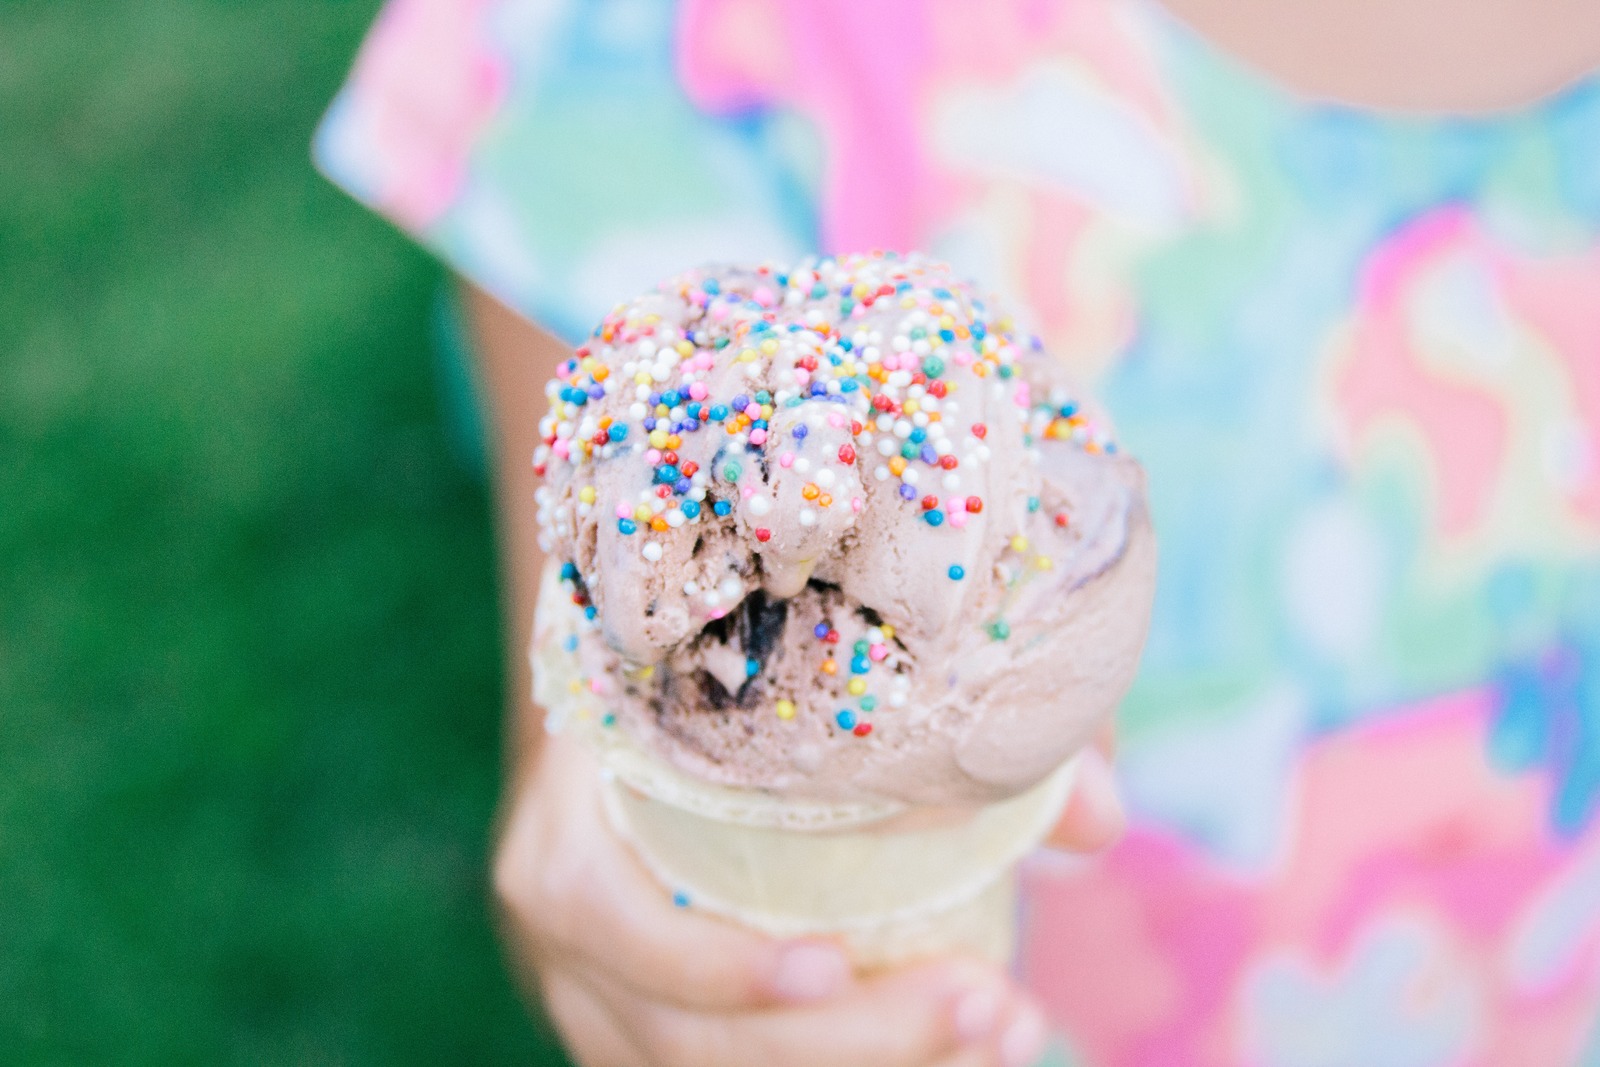 Do You Actually Prefer Ice Cream 🍦 or Cake 🍰? Ice Cream With Sprinkles